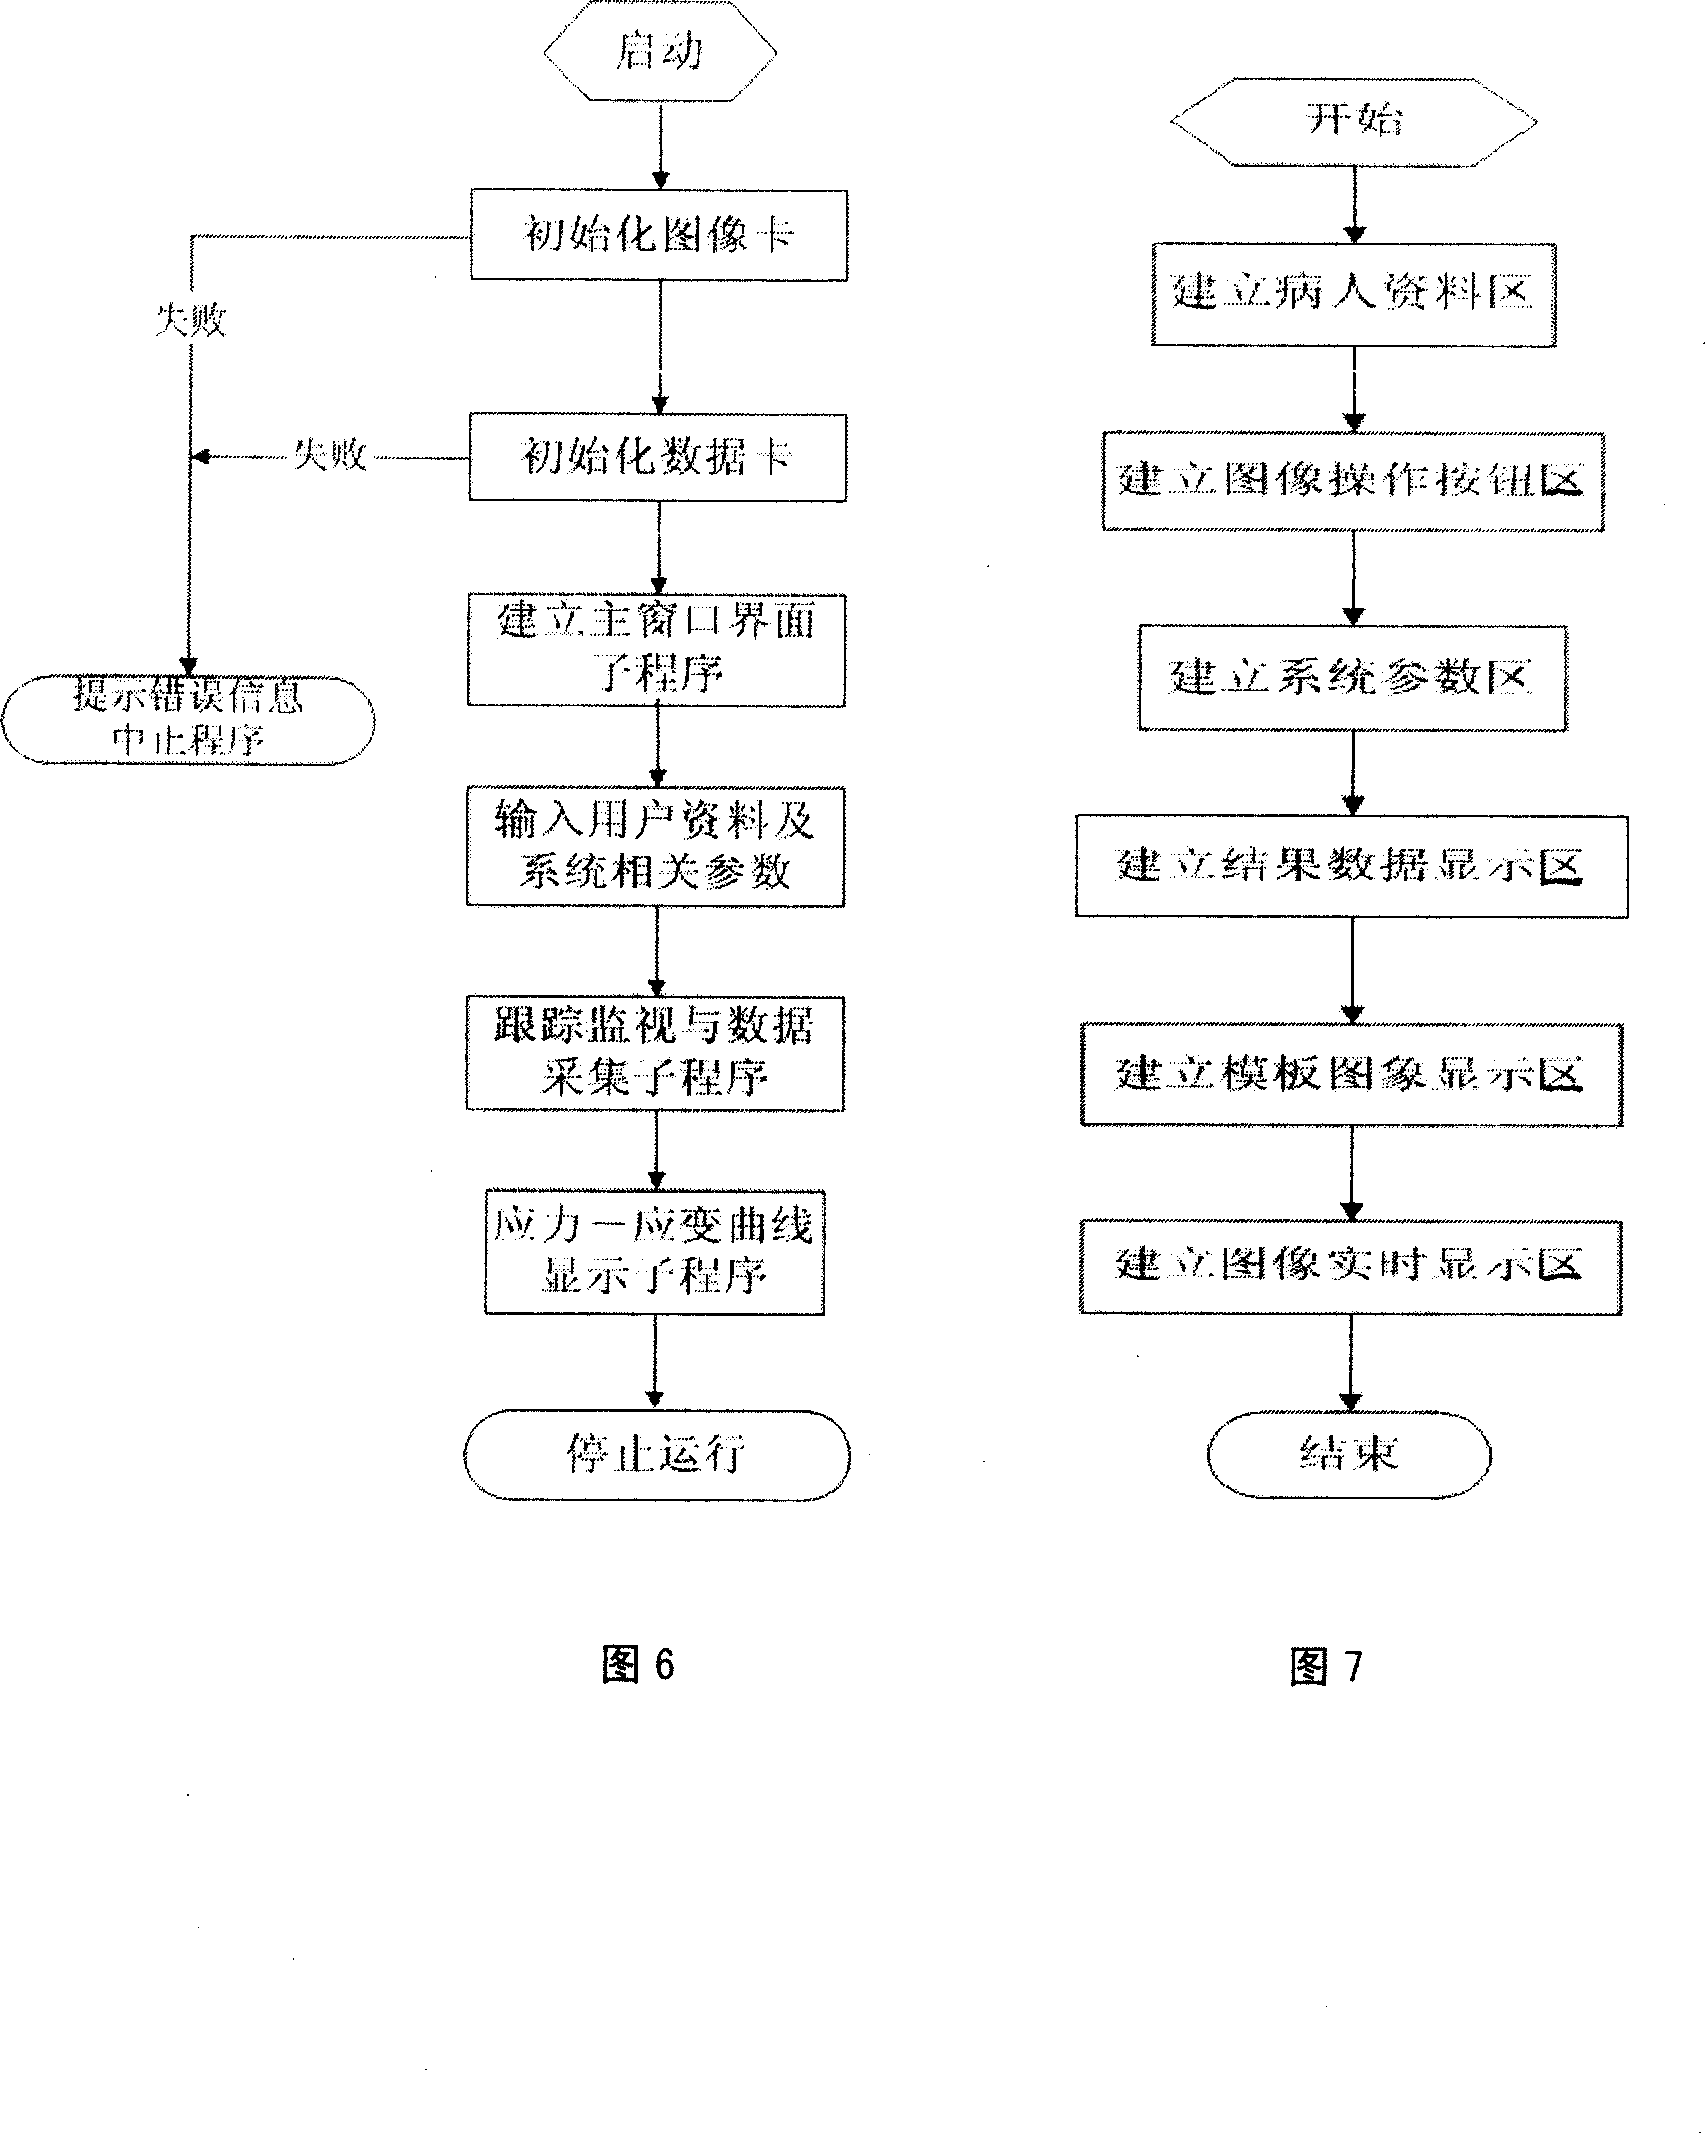 Integral soft tissue dynamic load response parameter collection system